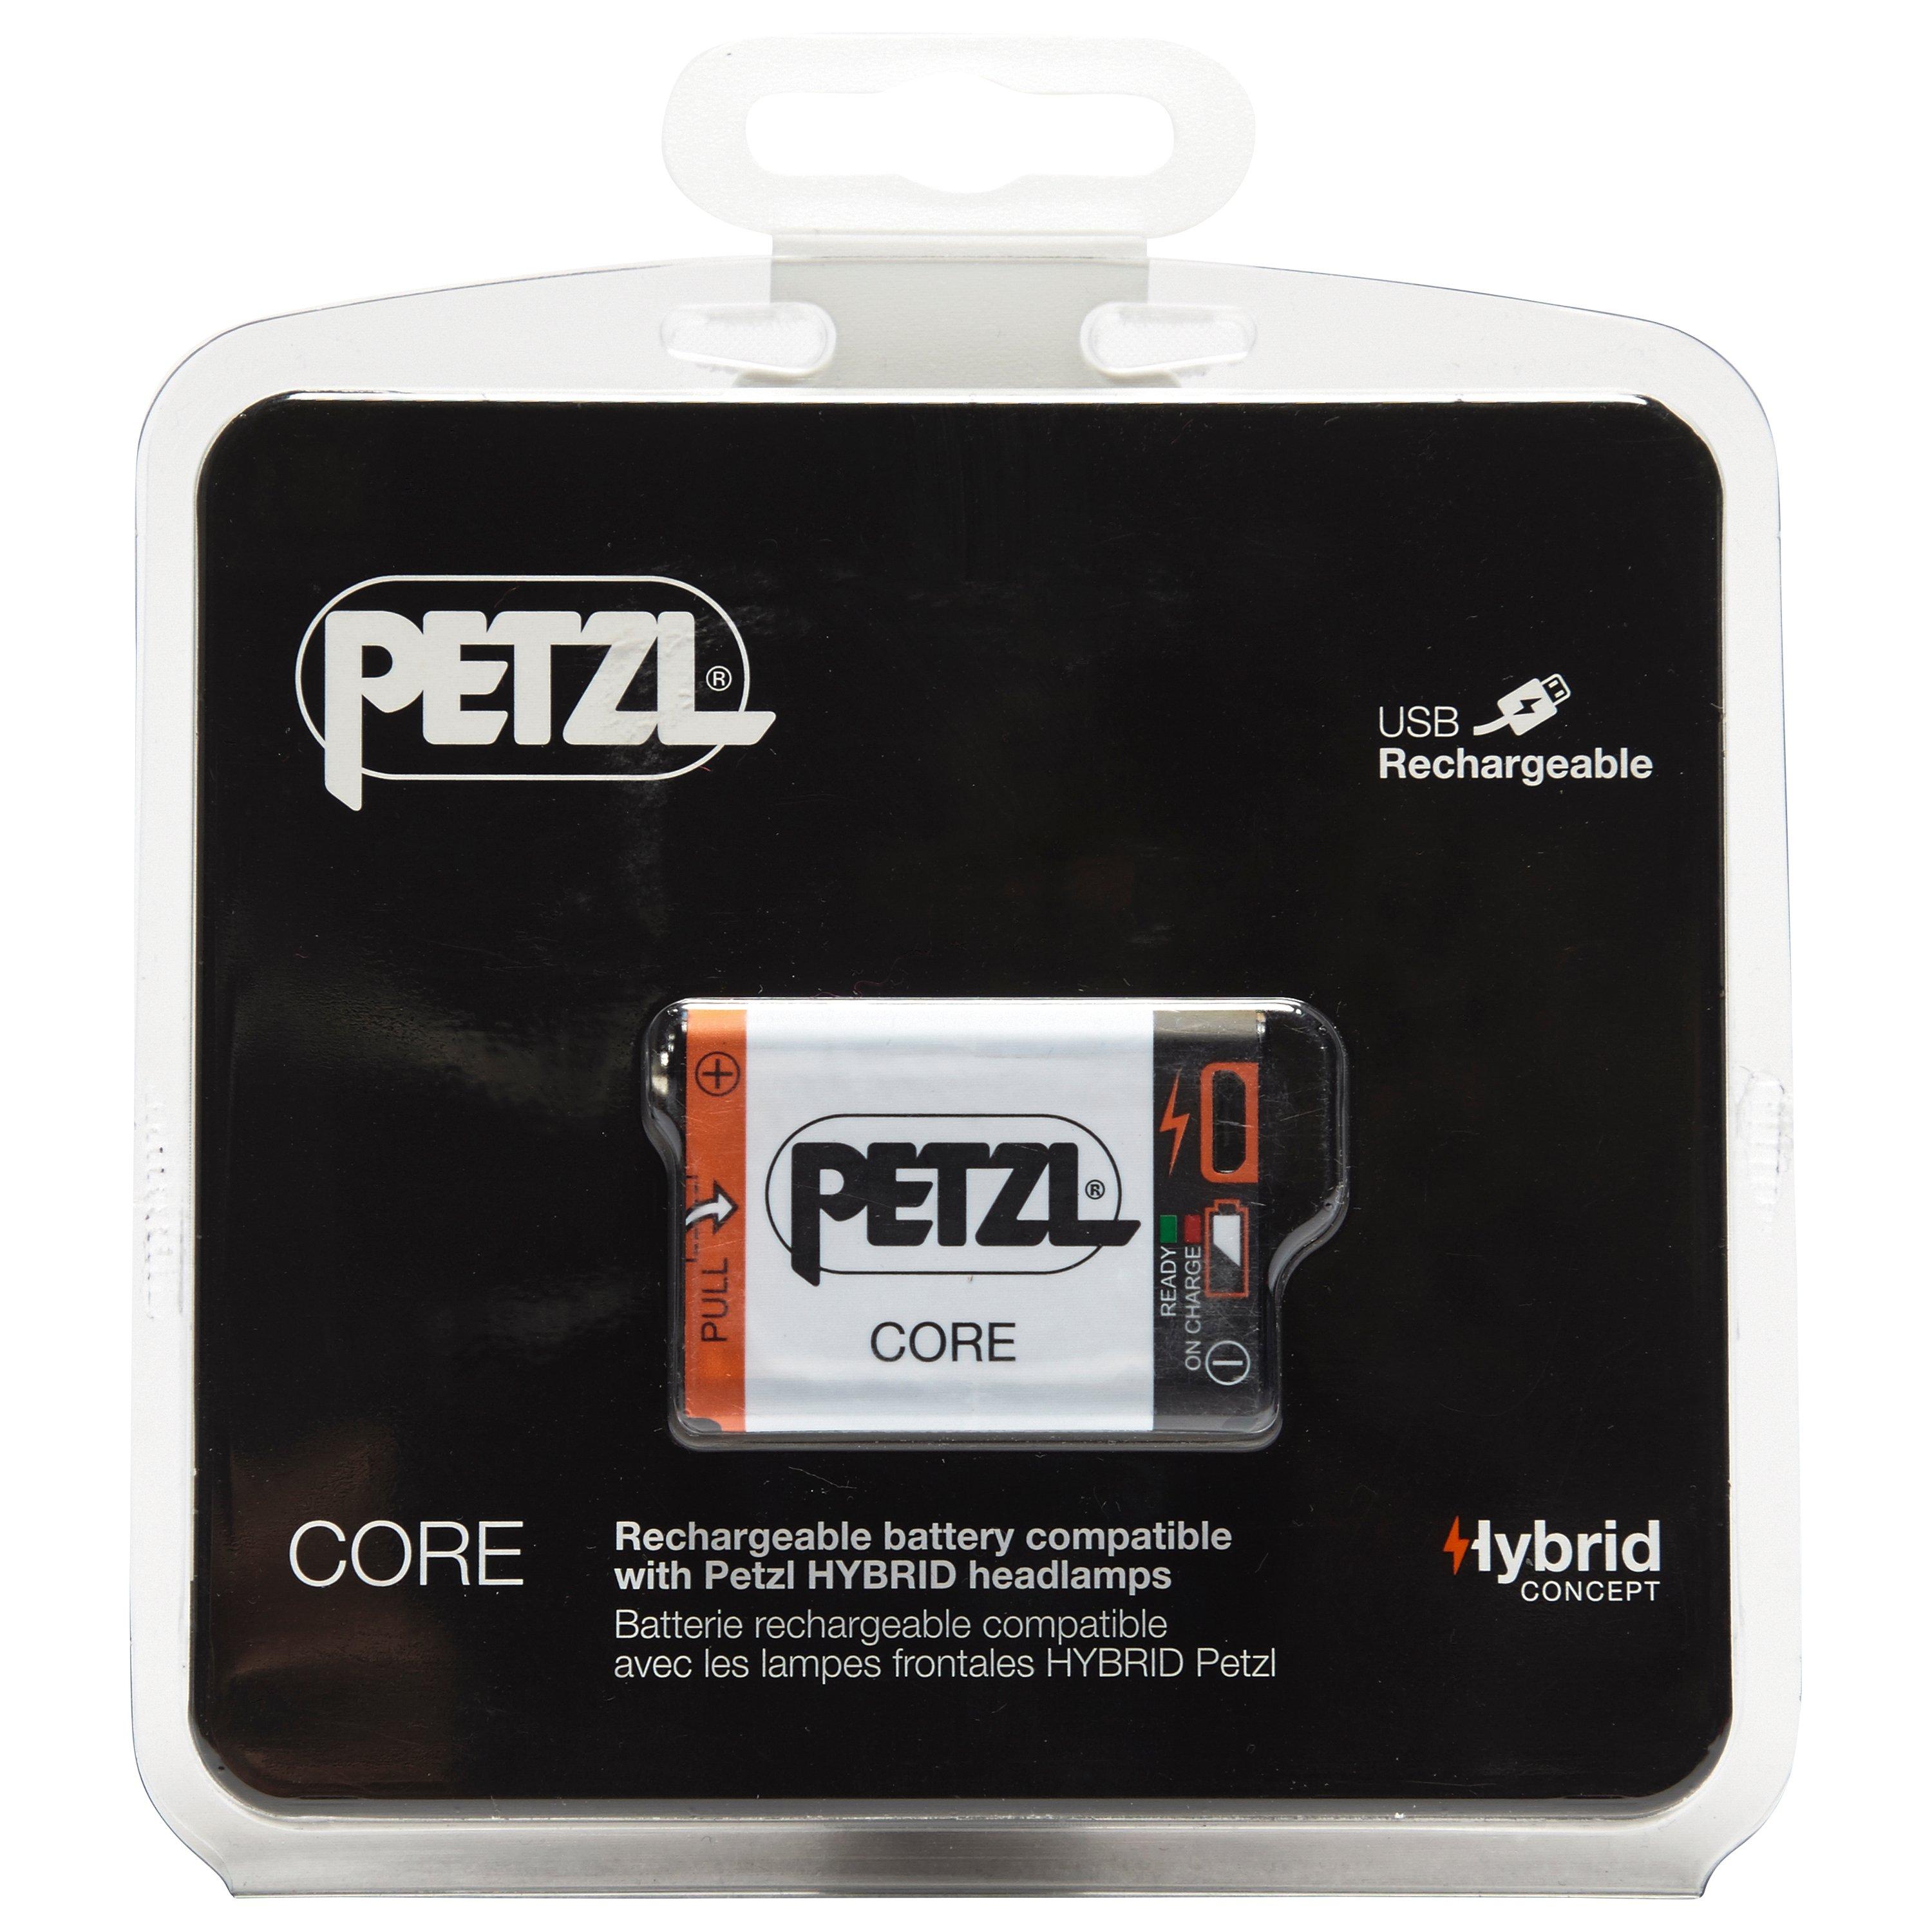 Petzl CORE Rechargeable battery for HYBRID models